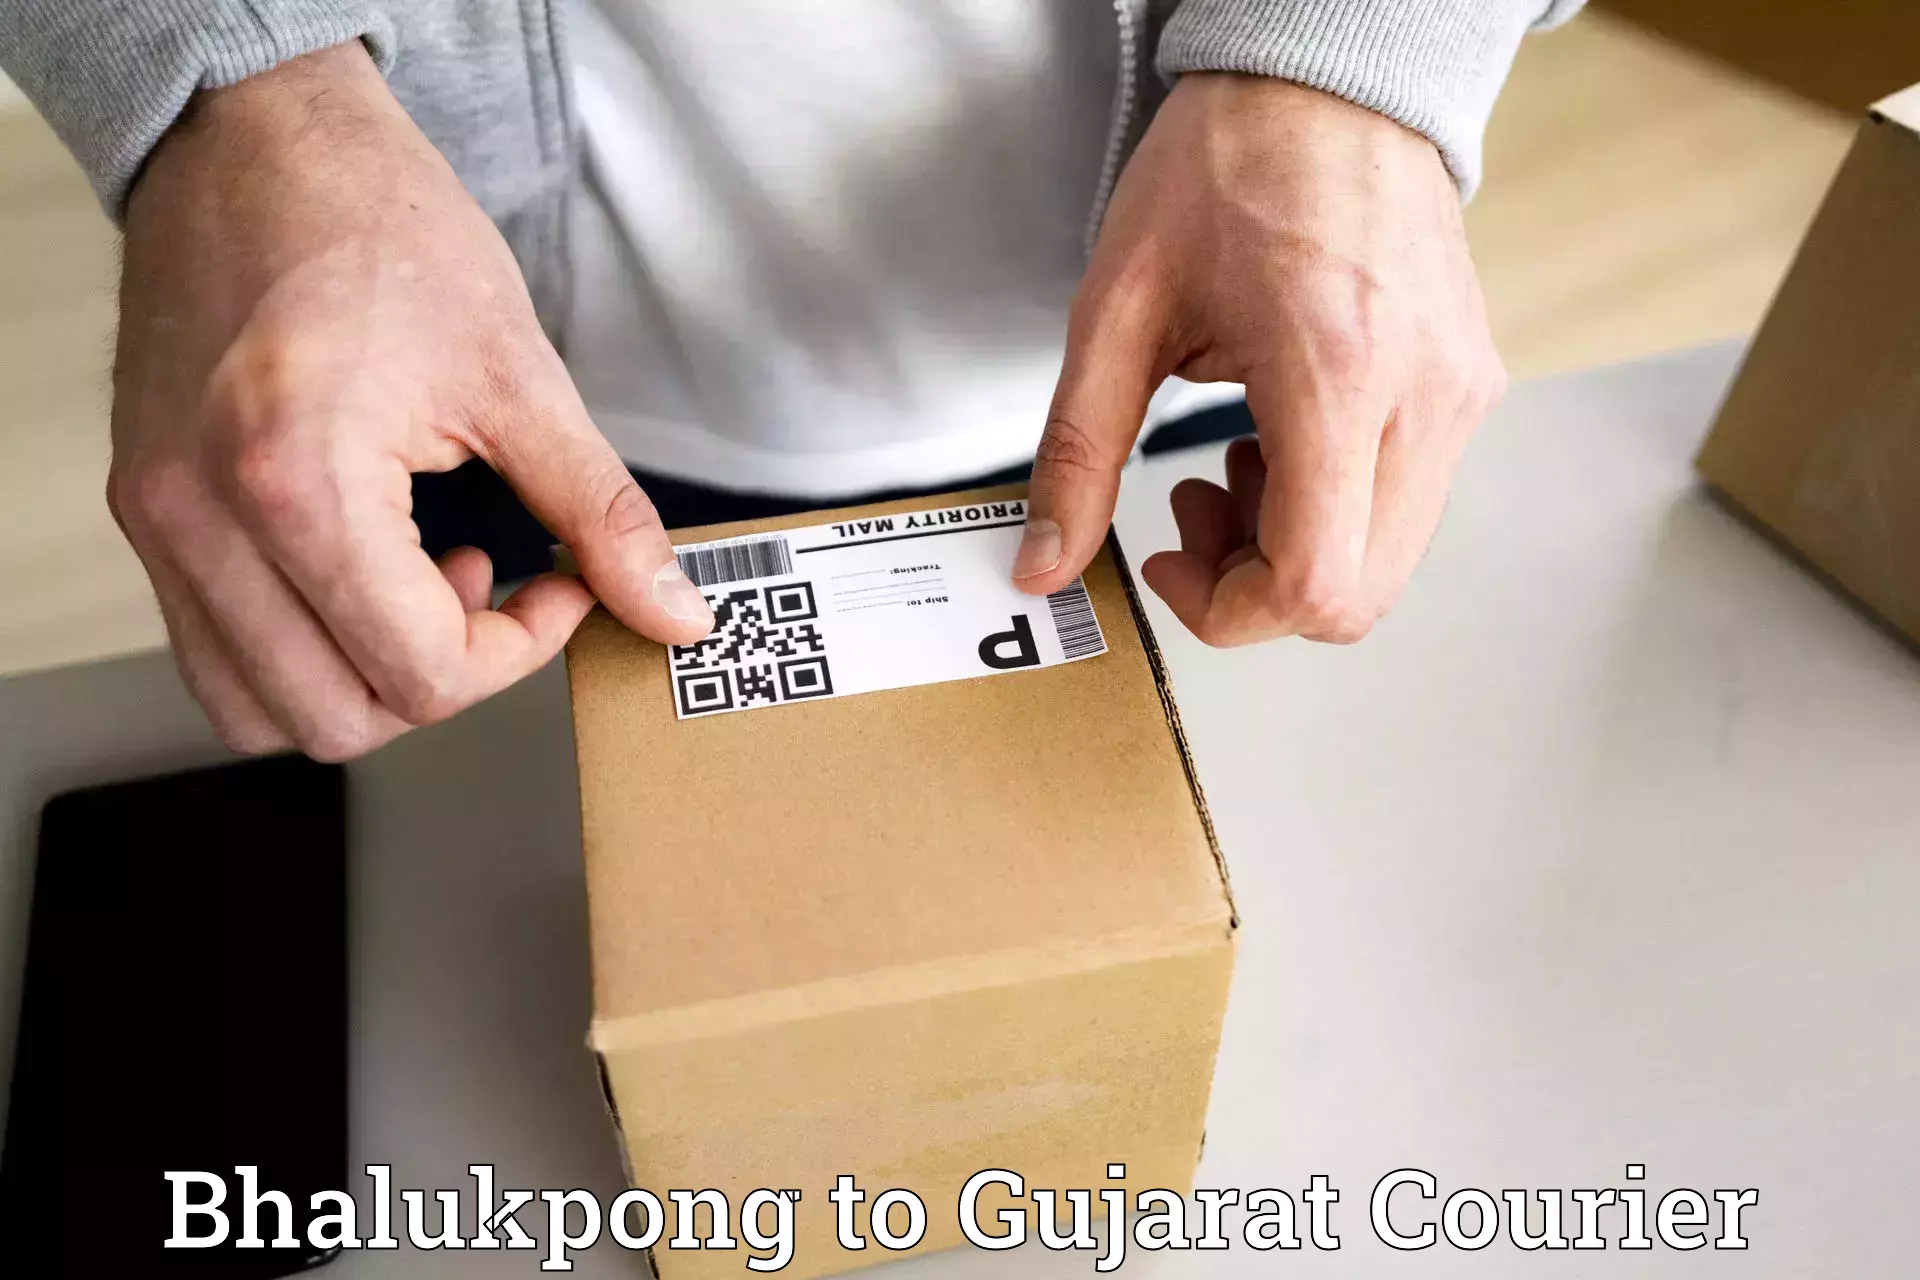 Courier service comparison in Bhalukpong to Mehsana